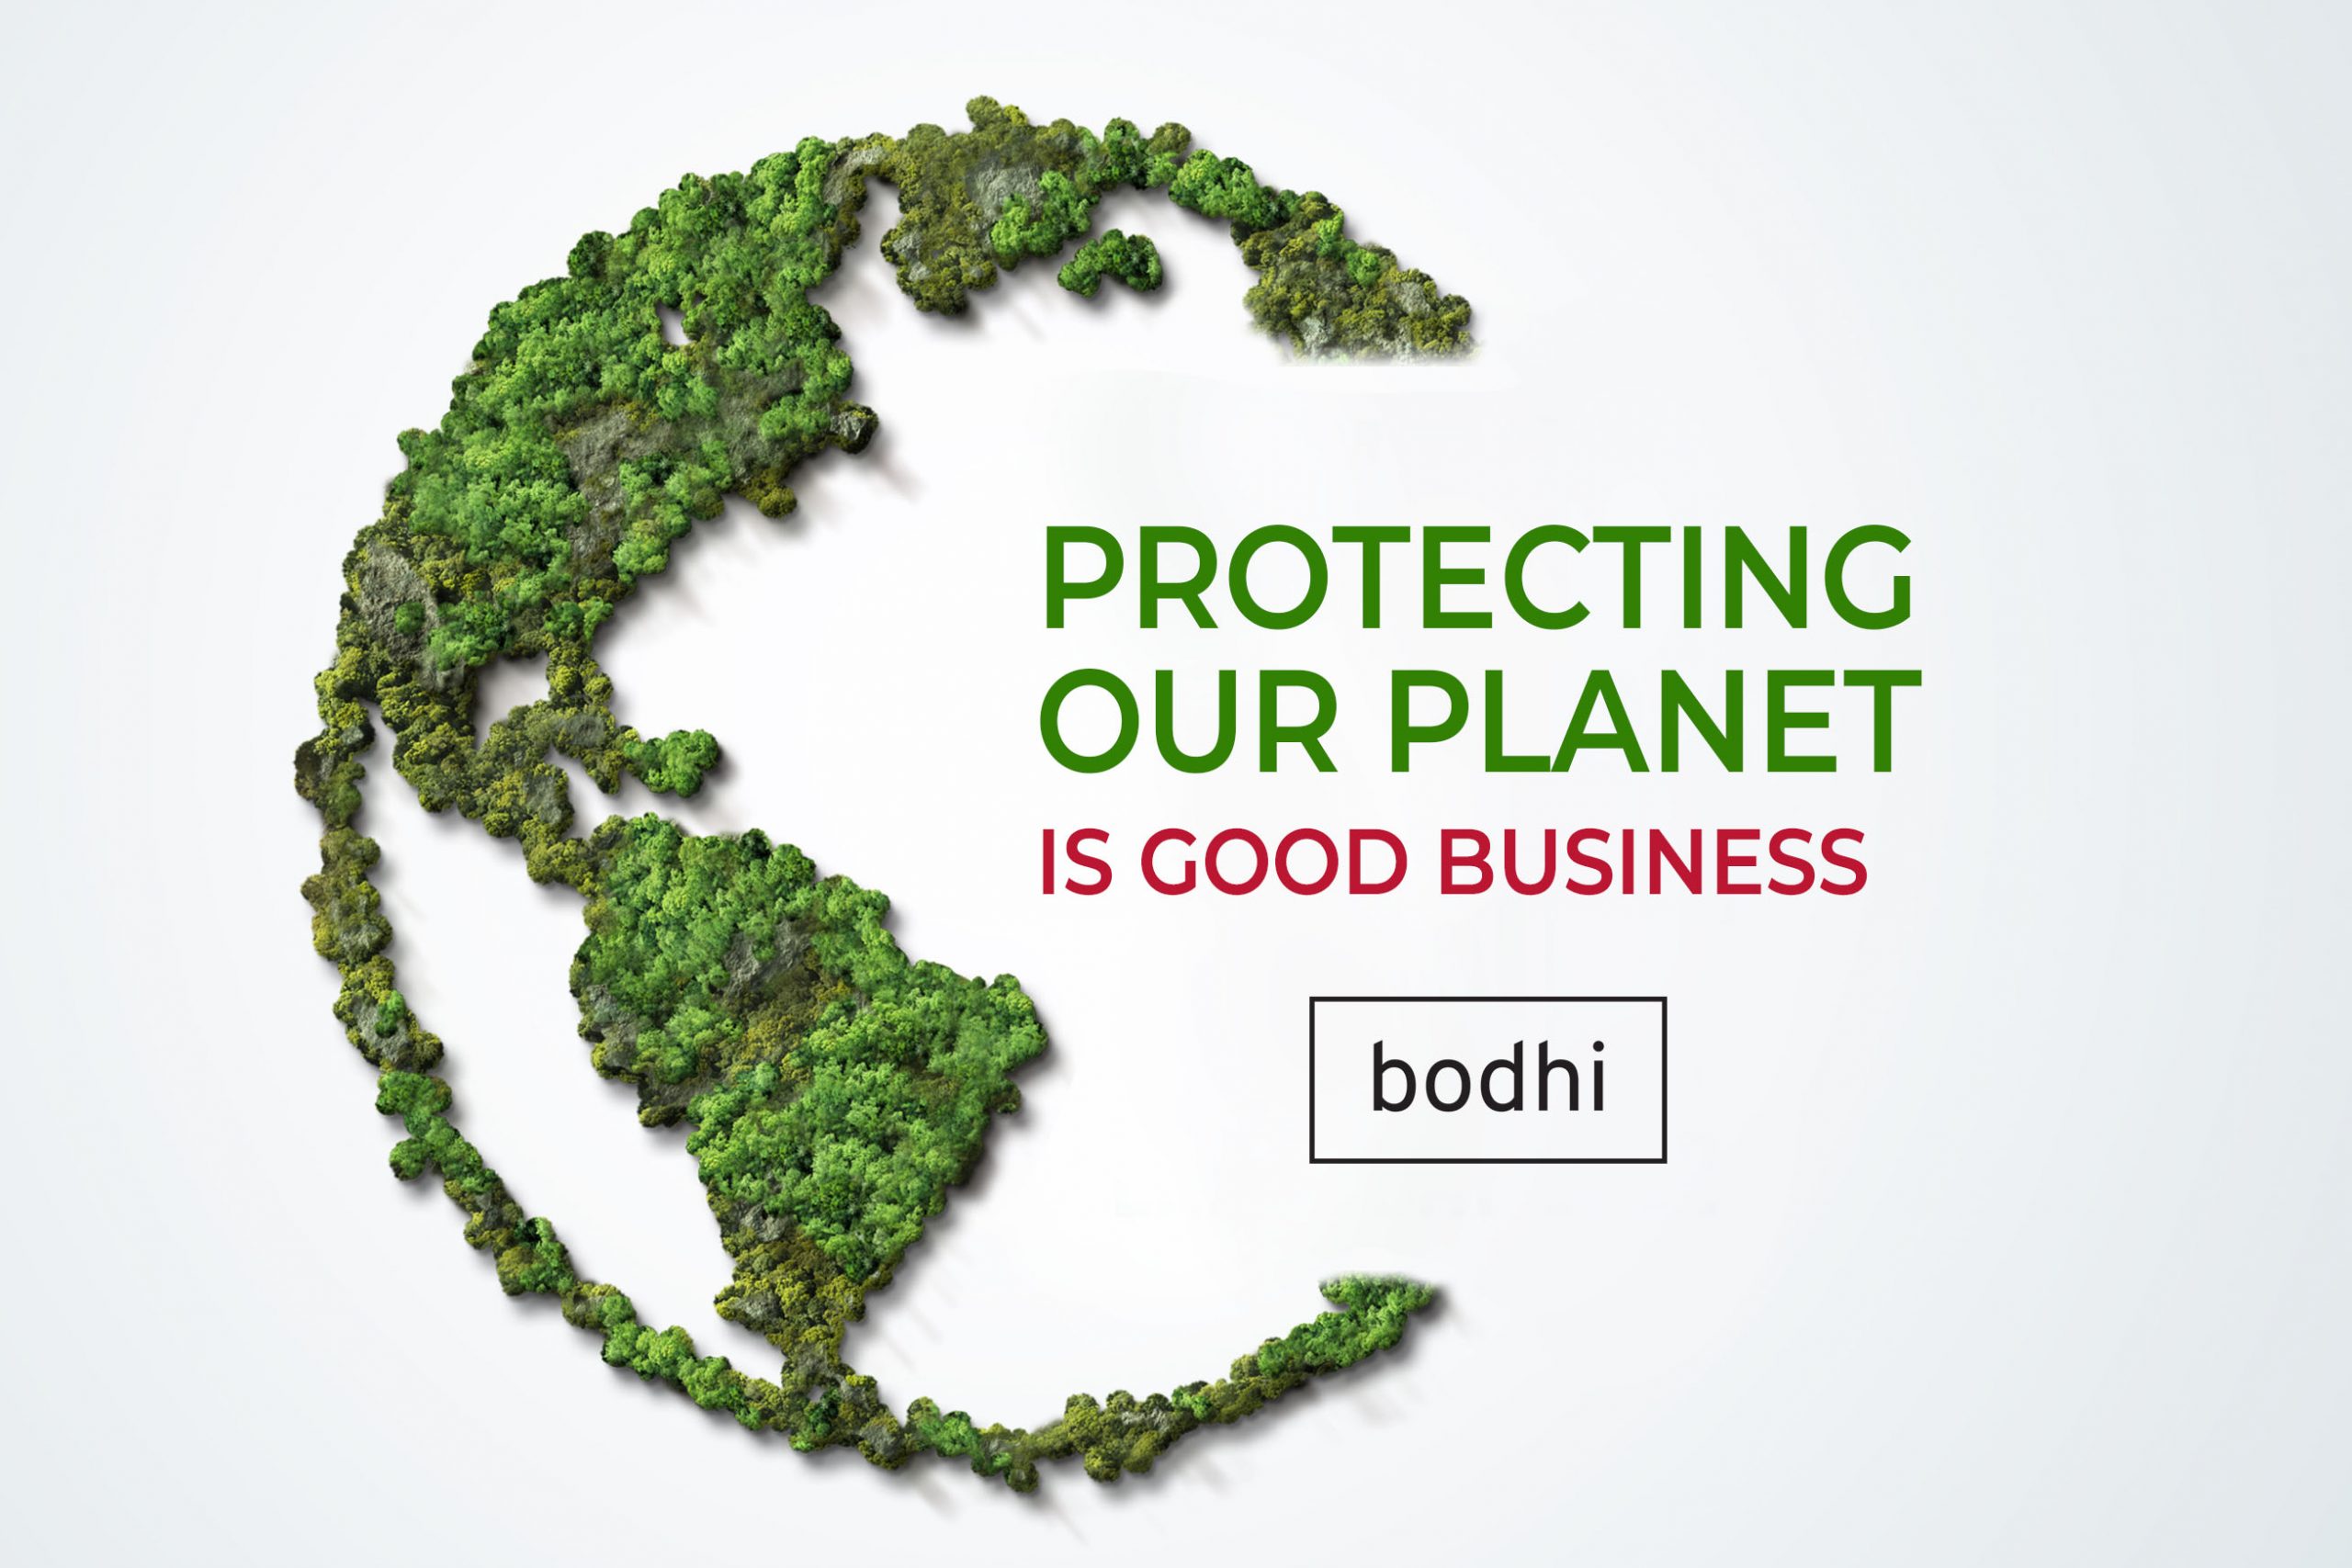 Bodhi can help you lower your carbon footprint while increasing profitability. 